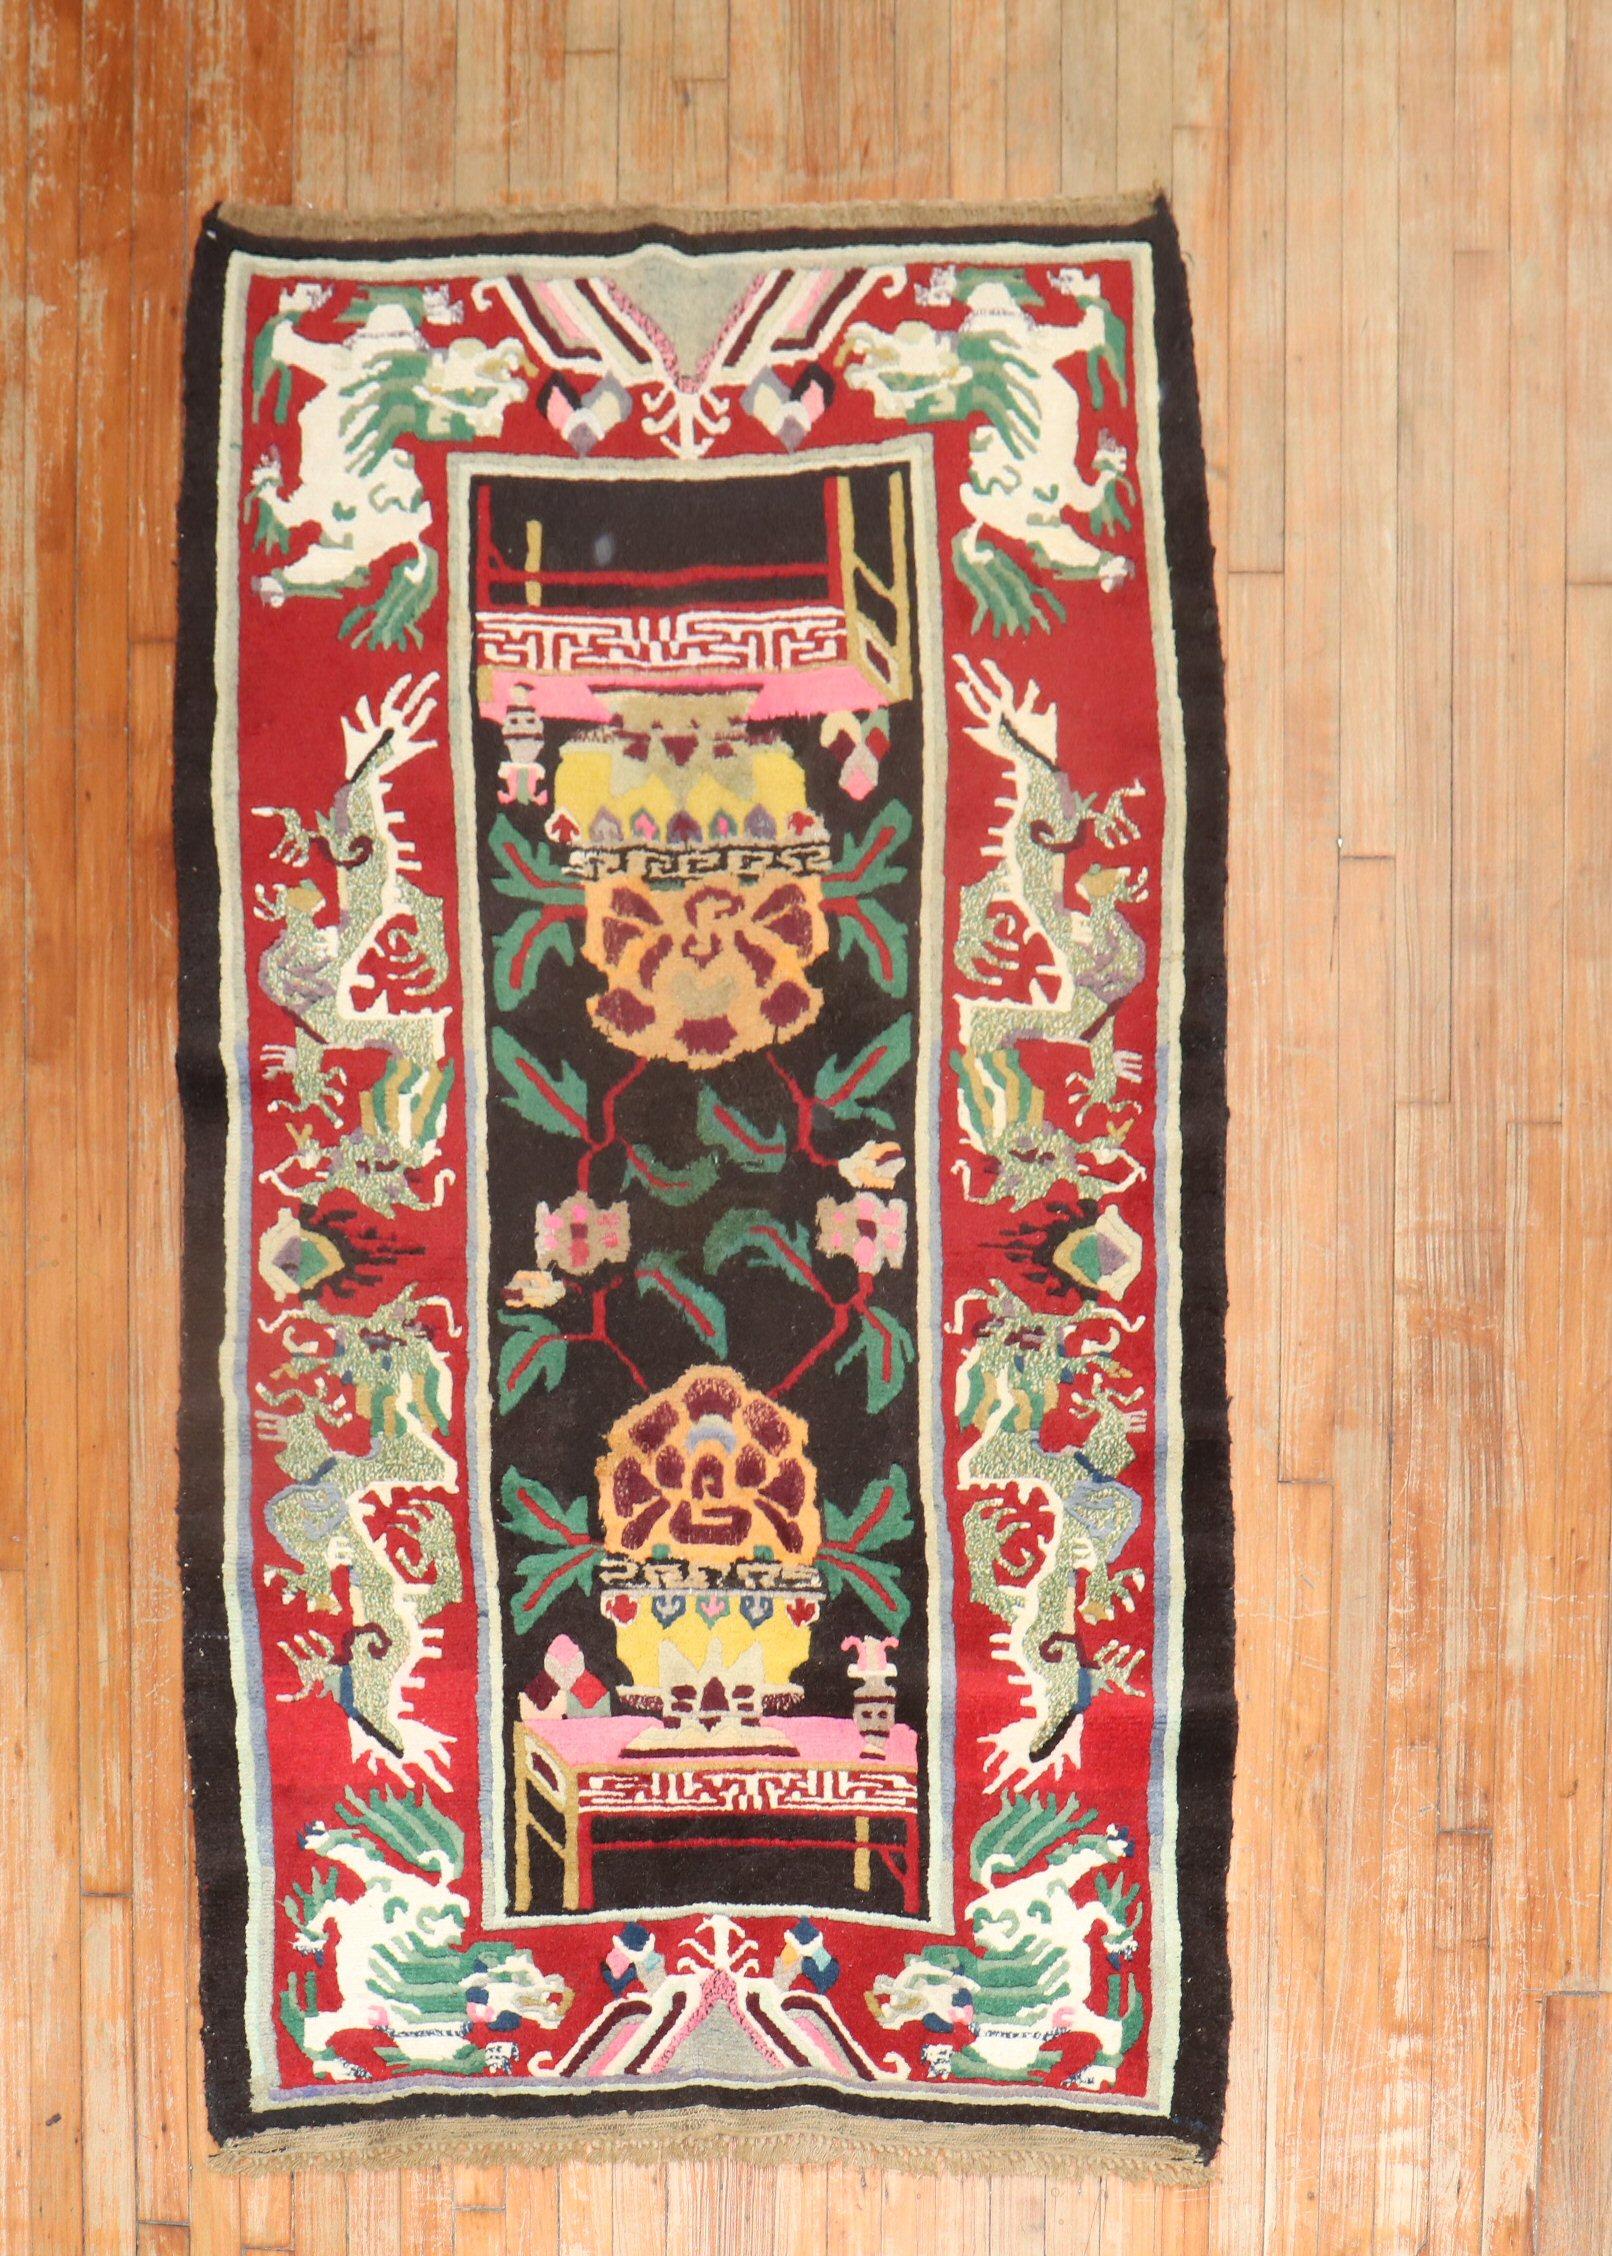 Colorful one of a kind Tibetan rug from the 3rd quarter of the 20th century

Measures: 3'8'' x 6'7''.